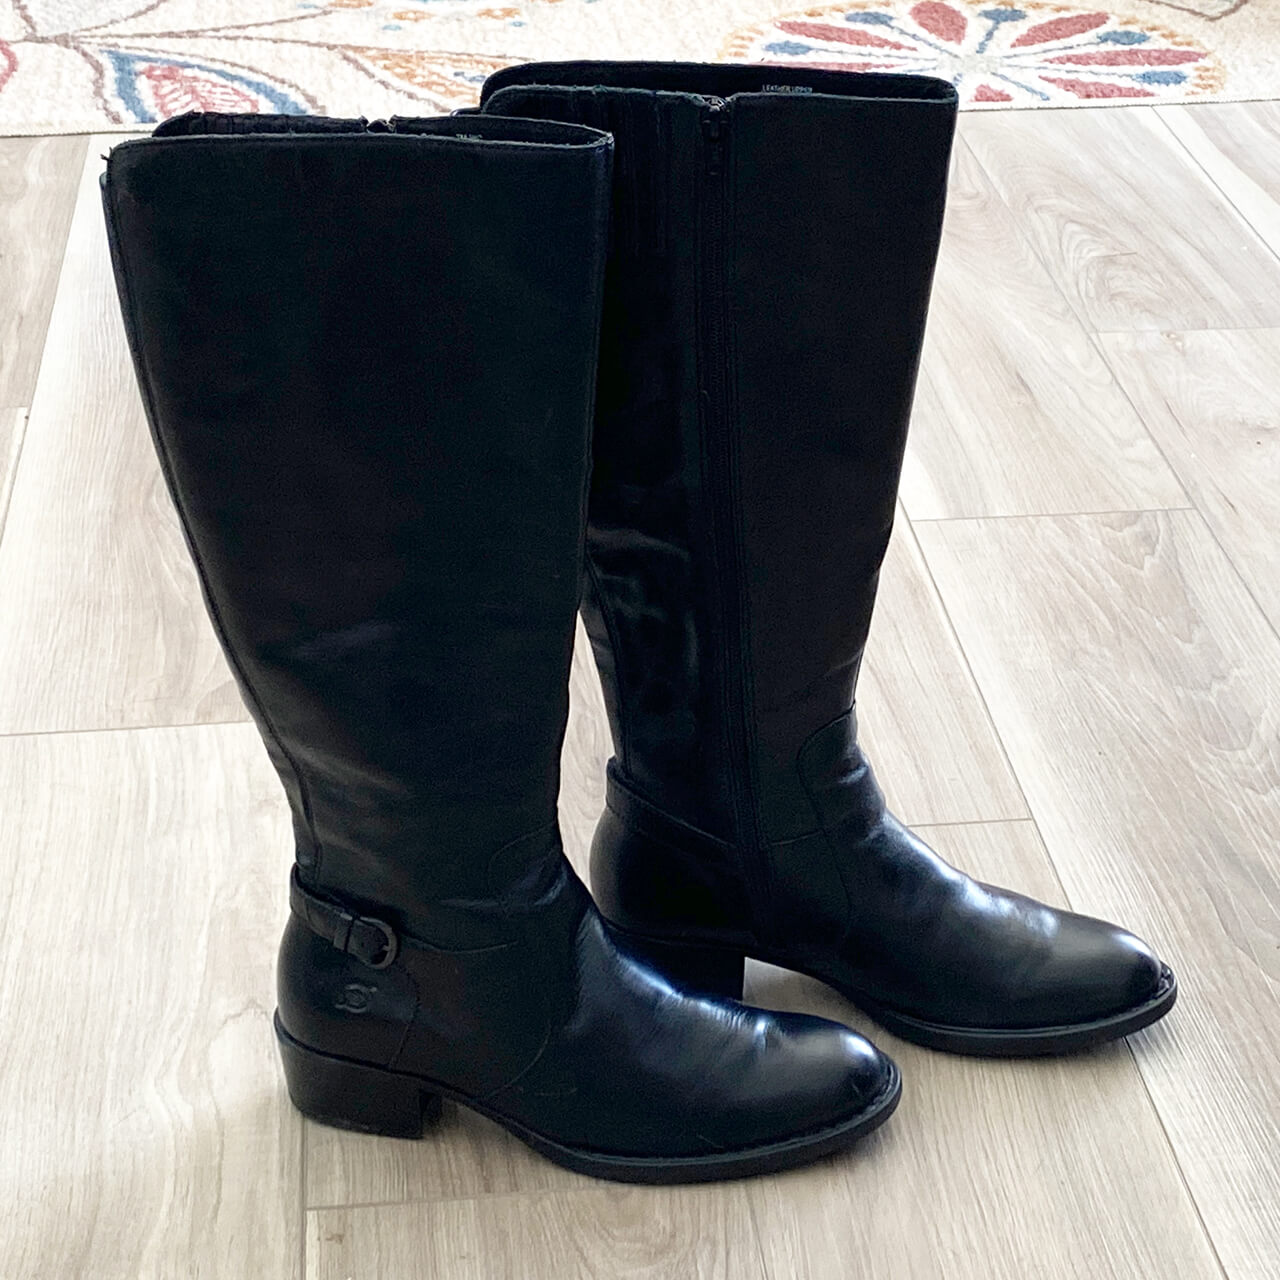 Black Knee High Leather Equestrian Riding Boots. Size 7M. Born. Helen